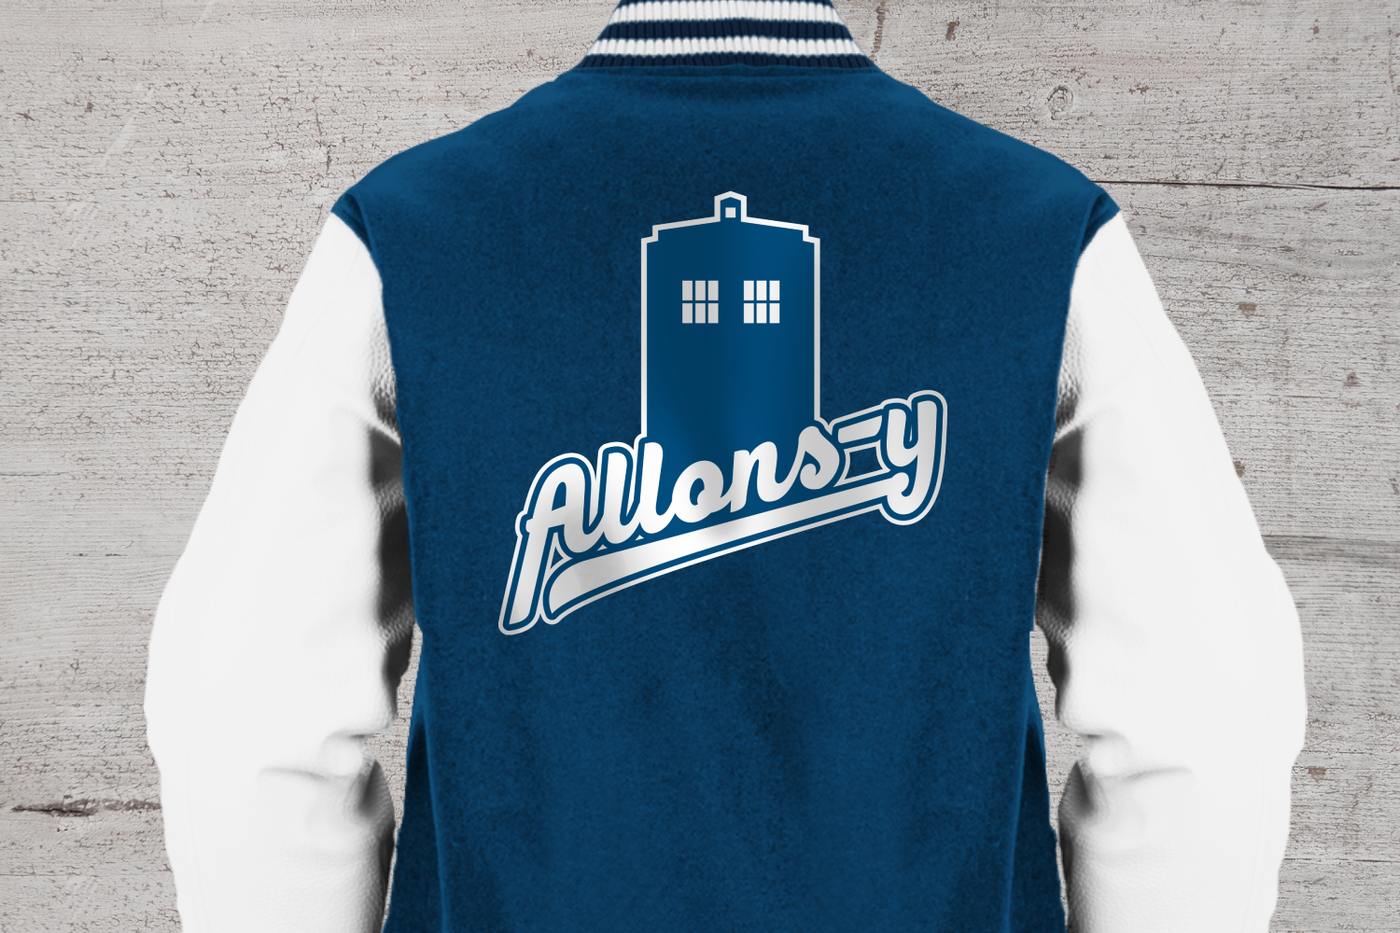 "Allons-y" in sports style lettering with a phone box peeking out from the top